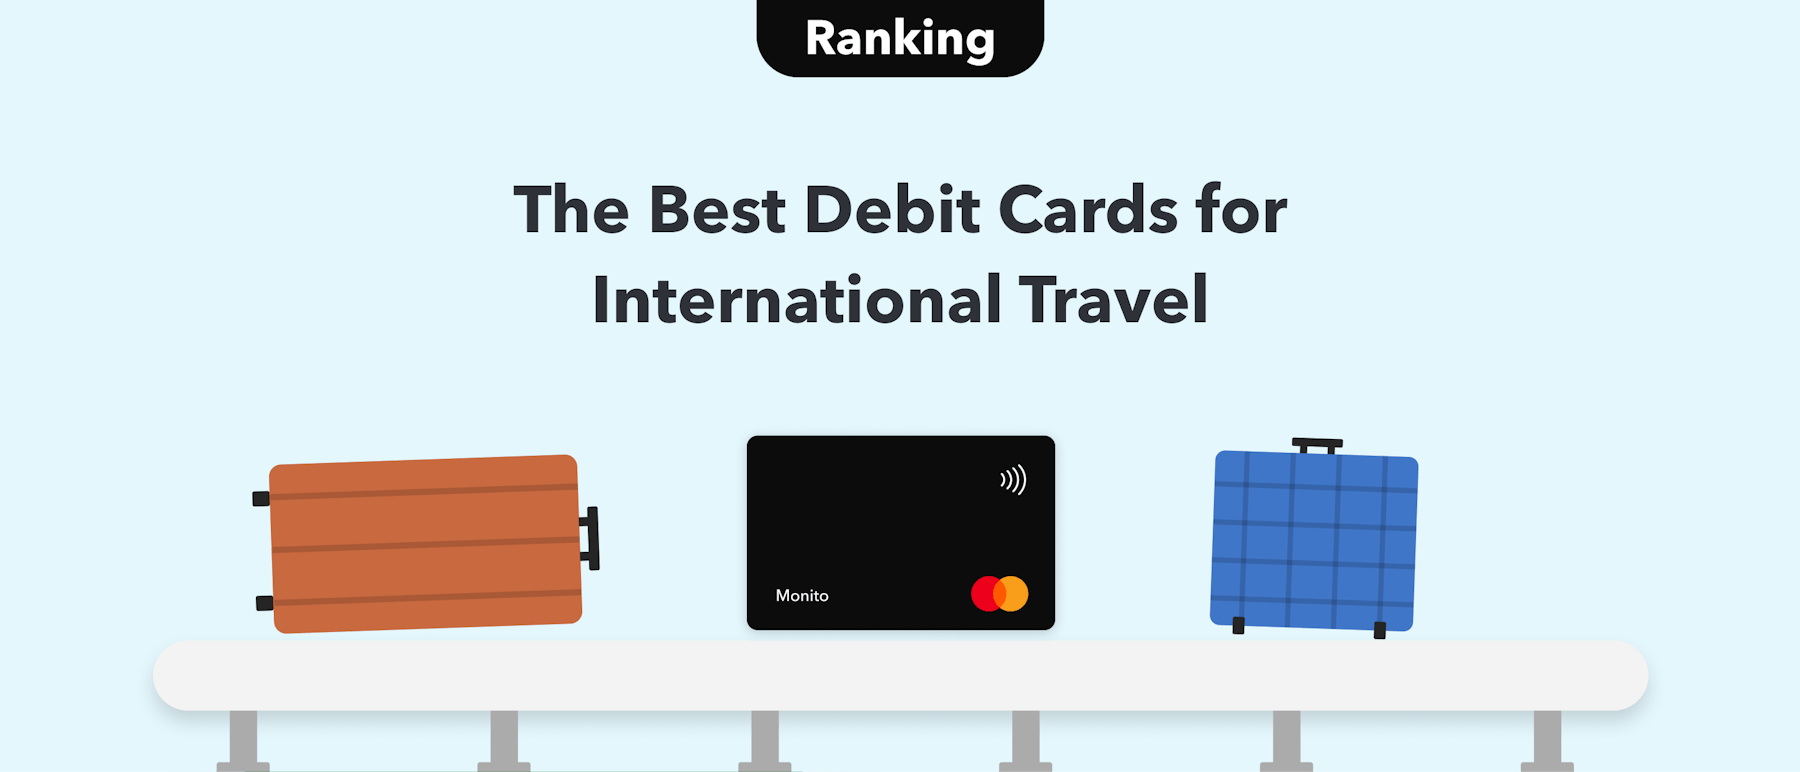 Best travel debit card for international travel with no foreign transaction fees on monito ranked